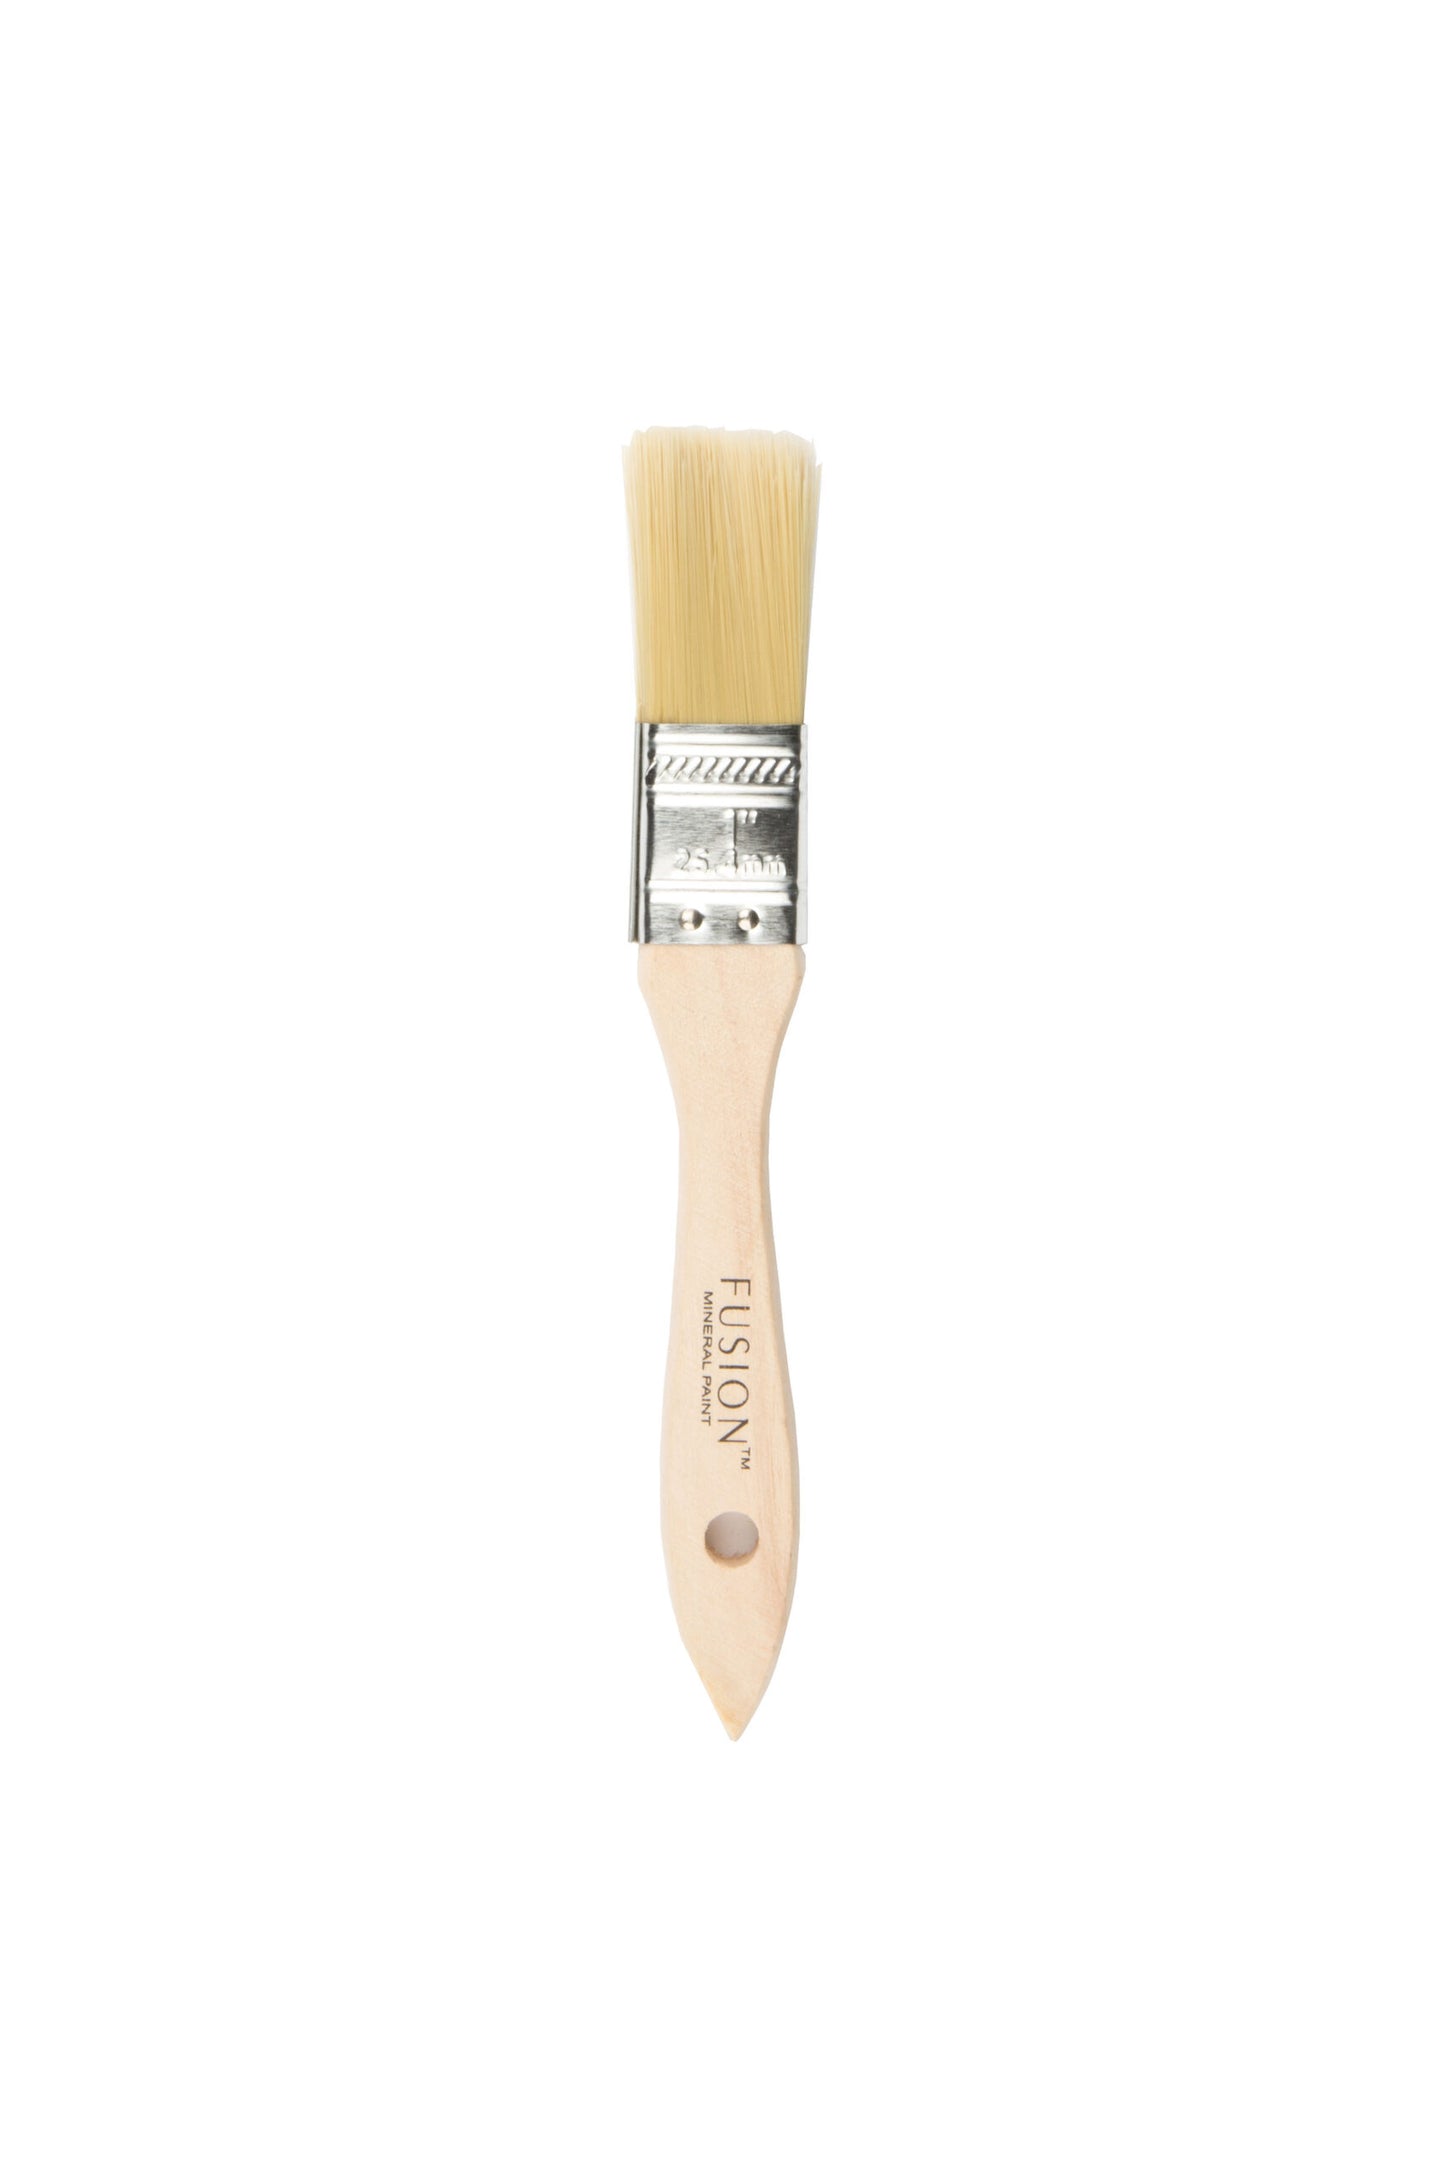 Fusion FLAT PAINT BRUSH  1" | fusion-flat-paint-brush-1 | Refinished P/L